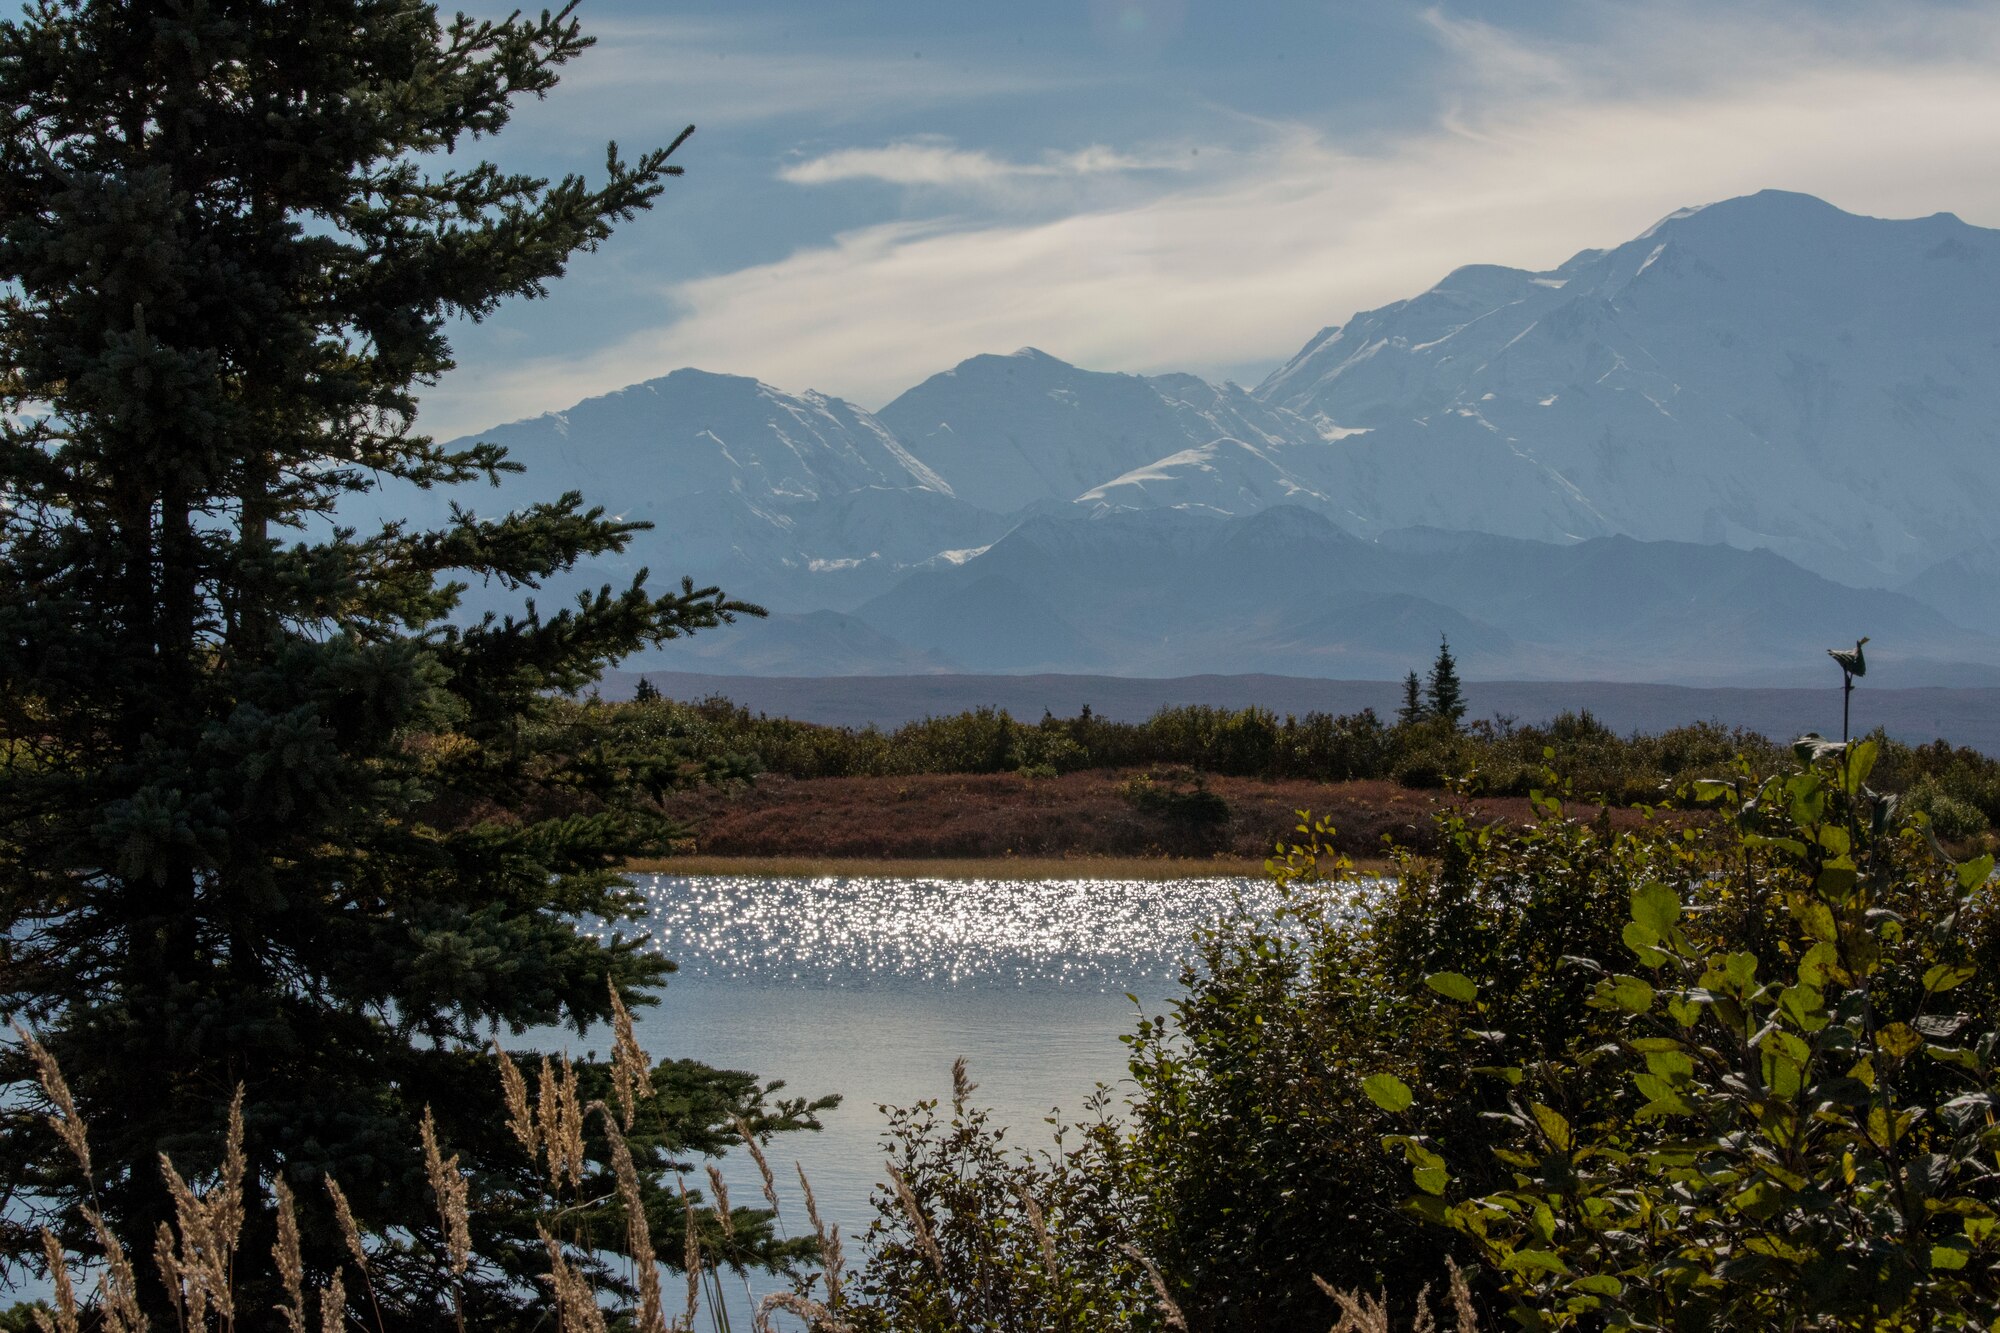 Denali is visible to visitors at Reflection Pond during Military Appreciation Day at Mile 85.3 in Denali National Park and Preserve, Alaska, Sept. 15, 2018. The 11th annual Military Appreciation Day included 400 “road lottery” tickets given out to Alaska-based service members. With the warm, dry weather conditions this year, road lottery recipients were given the chance to drive out to the end of the park road at Mile 92.